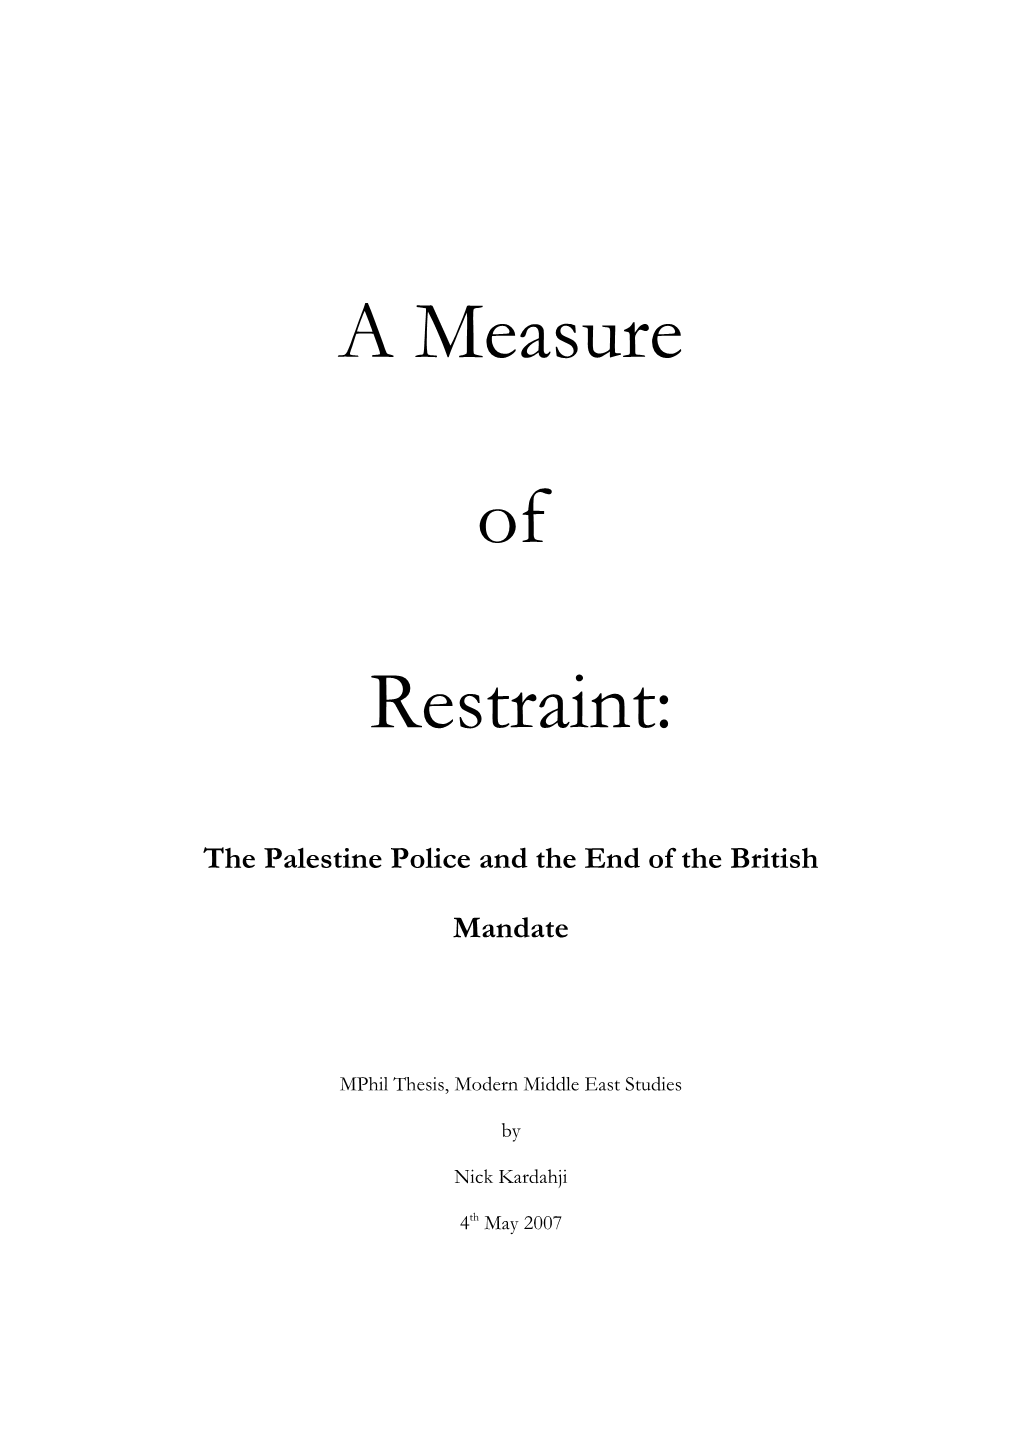 The Palestine Police and the End of the British Mandate